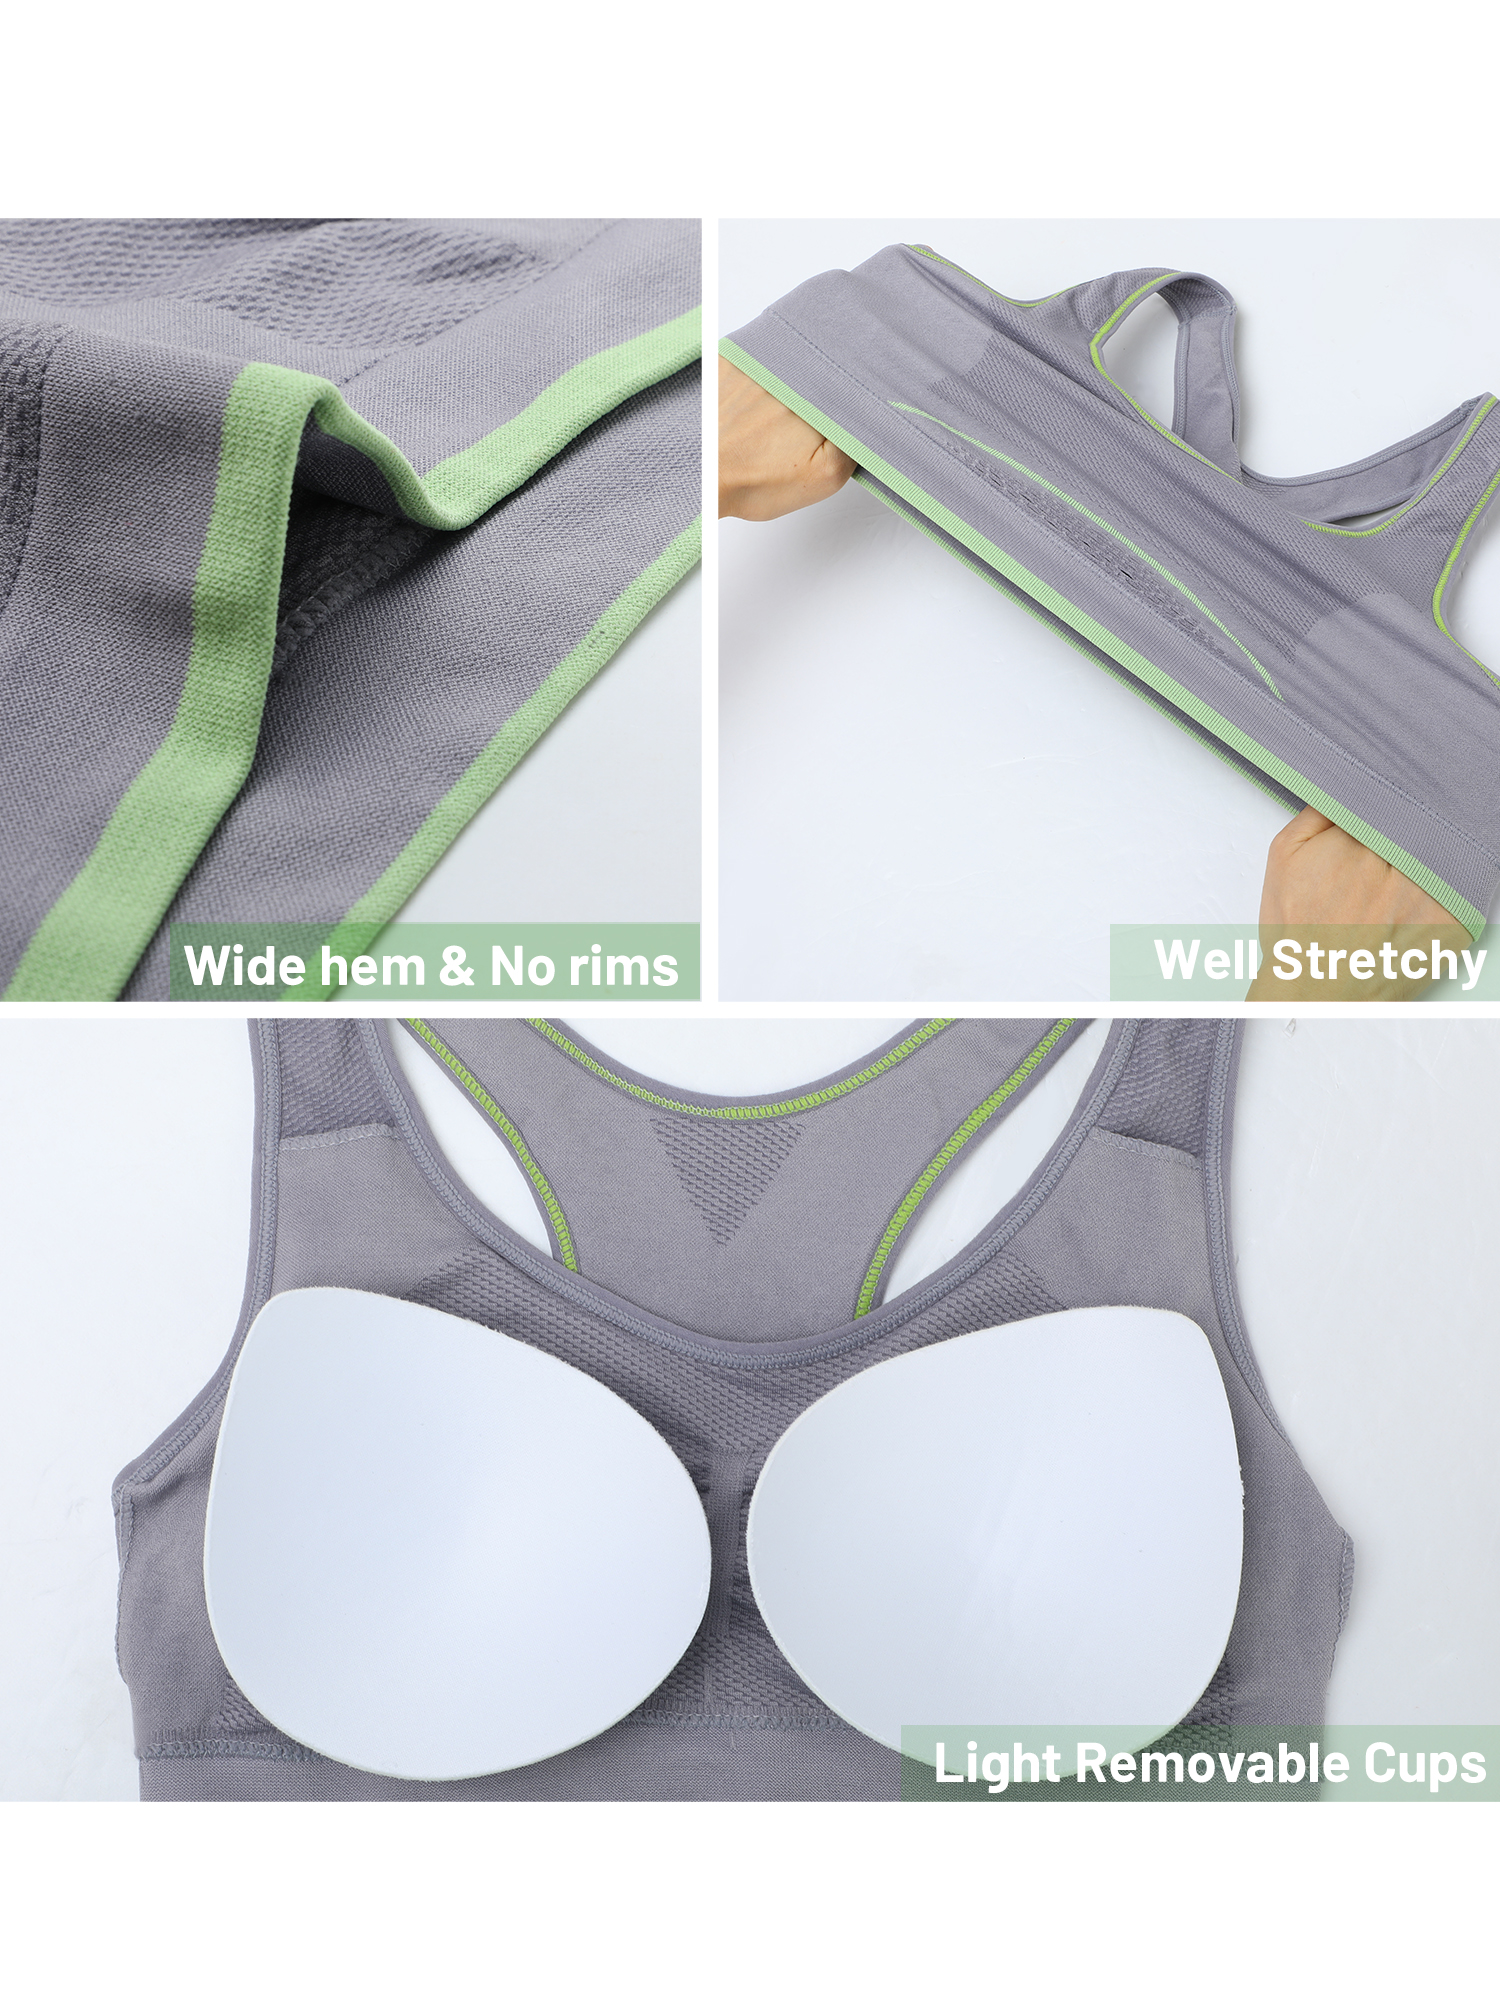 Women's Sports Bras High Impact Seamless Yoga Racerback with Removable Cups - image 4 of 6